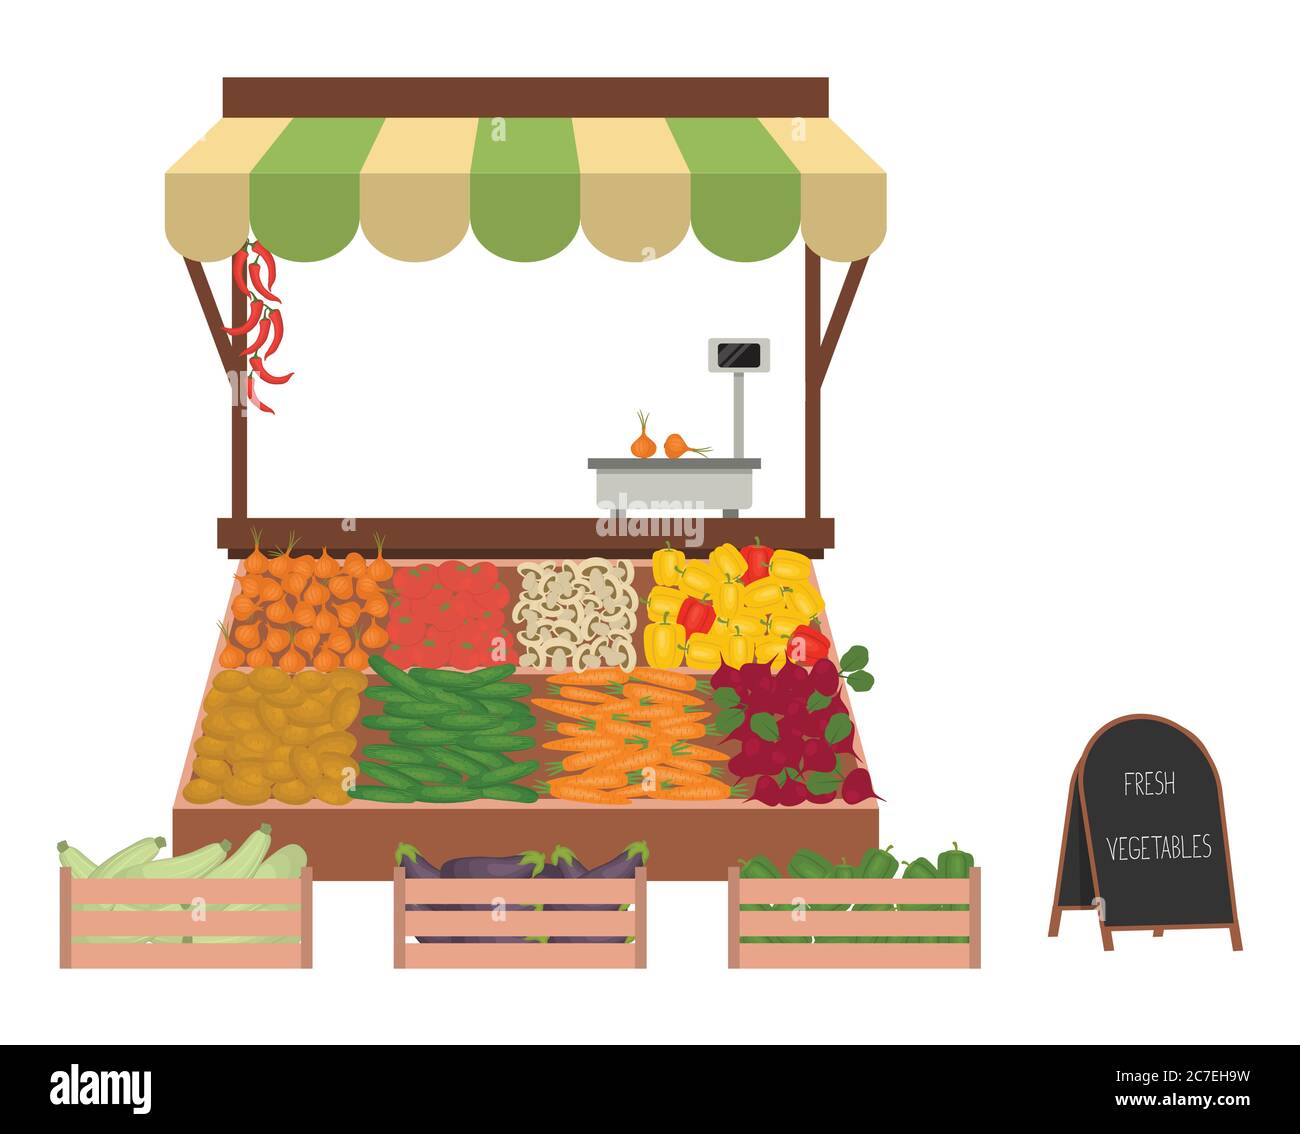 Tray with vegetables on the market. Workplace of the market seller. There is scales and goods: cucumbers, onions, carrots, eggplant, zucchini, perrers Stock Vector